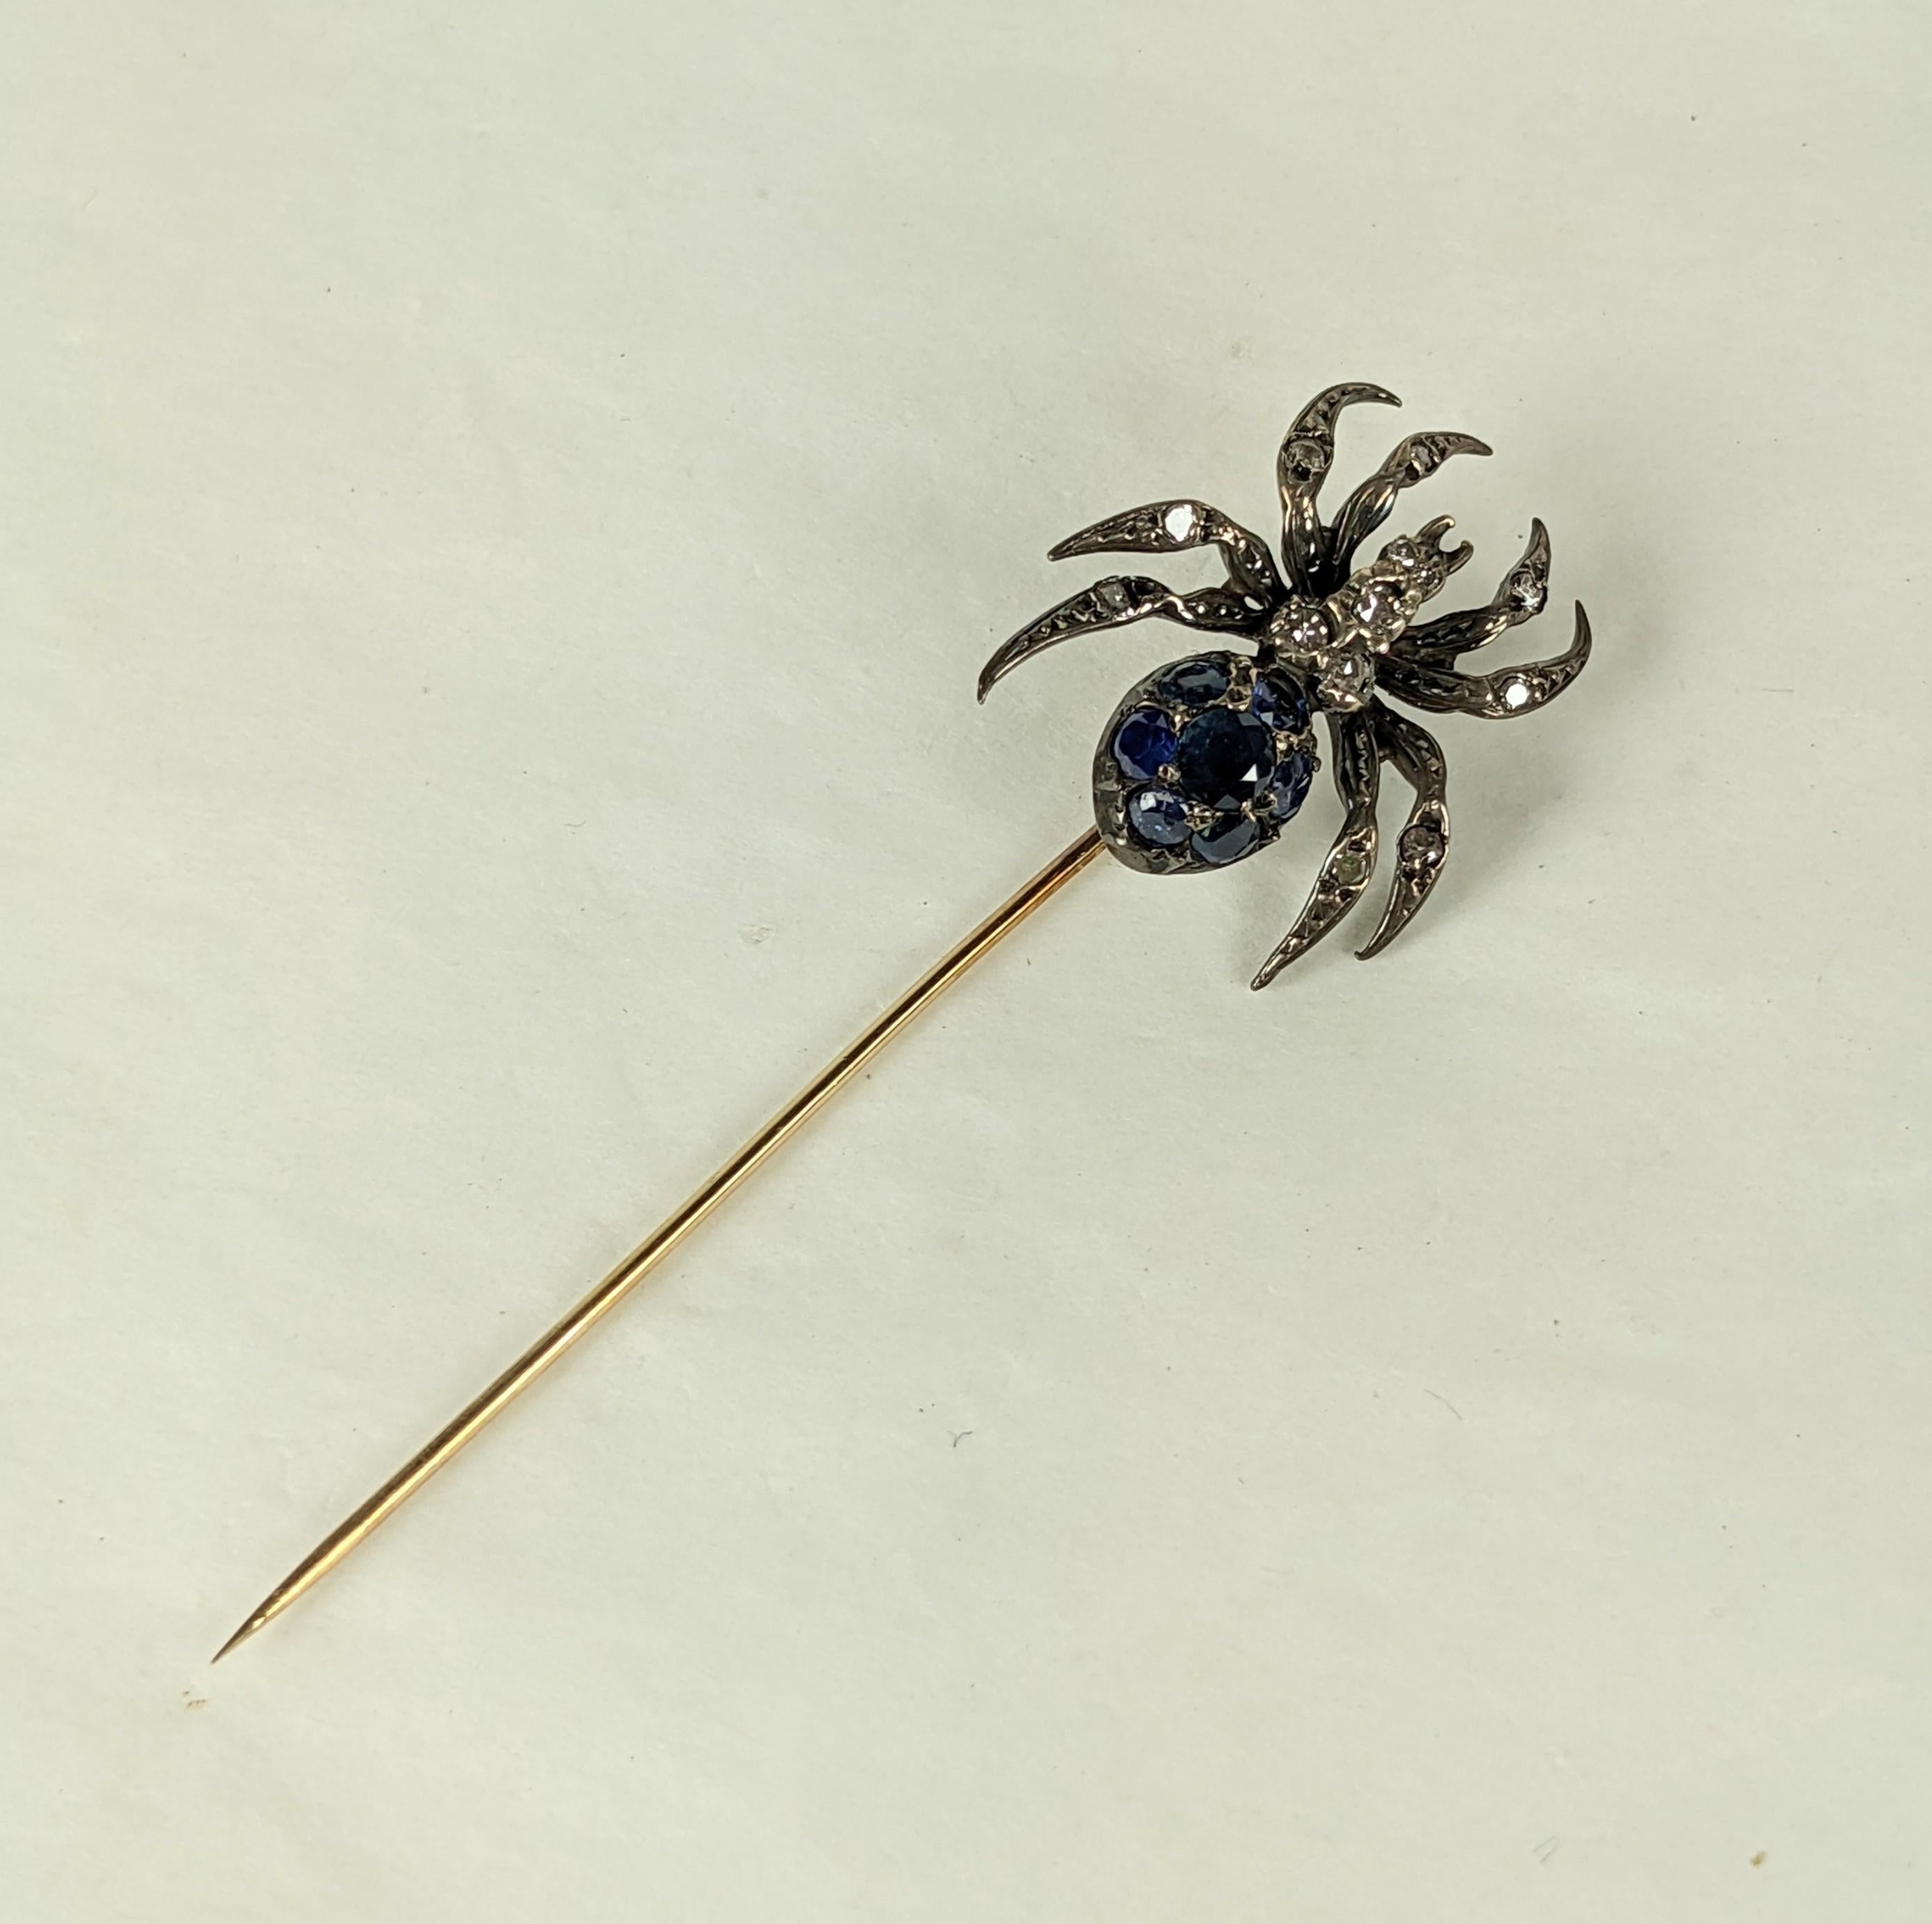 Striking Antique Diamond and Sapphire Spider Stickpin from the turn of the 20th Century. Beautifully detailed, set in silver topped gold with round diamonds and a pave sapphire body with 14k gold shaft. 
1890-1900. 